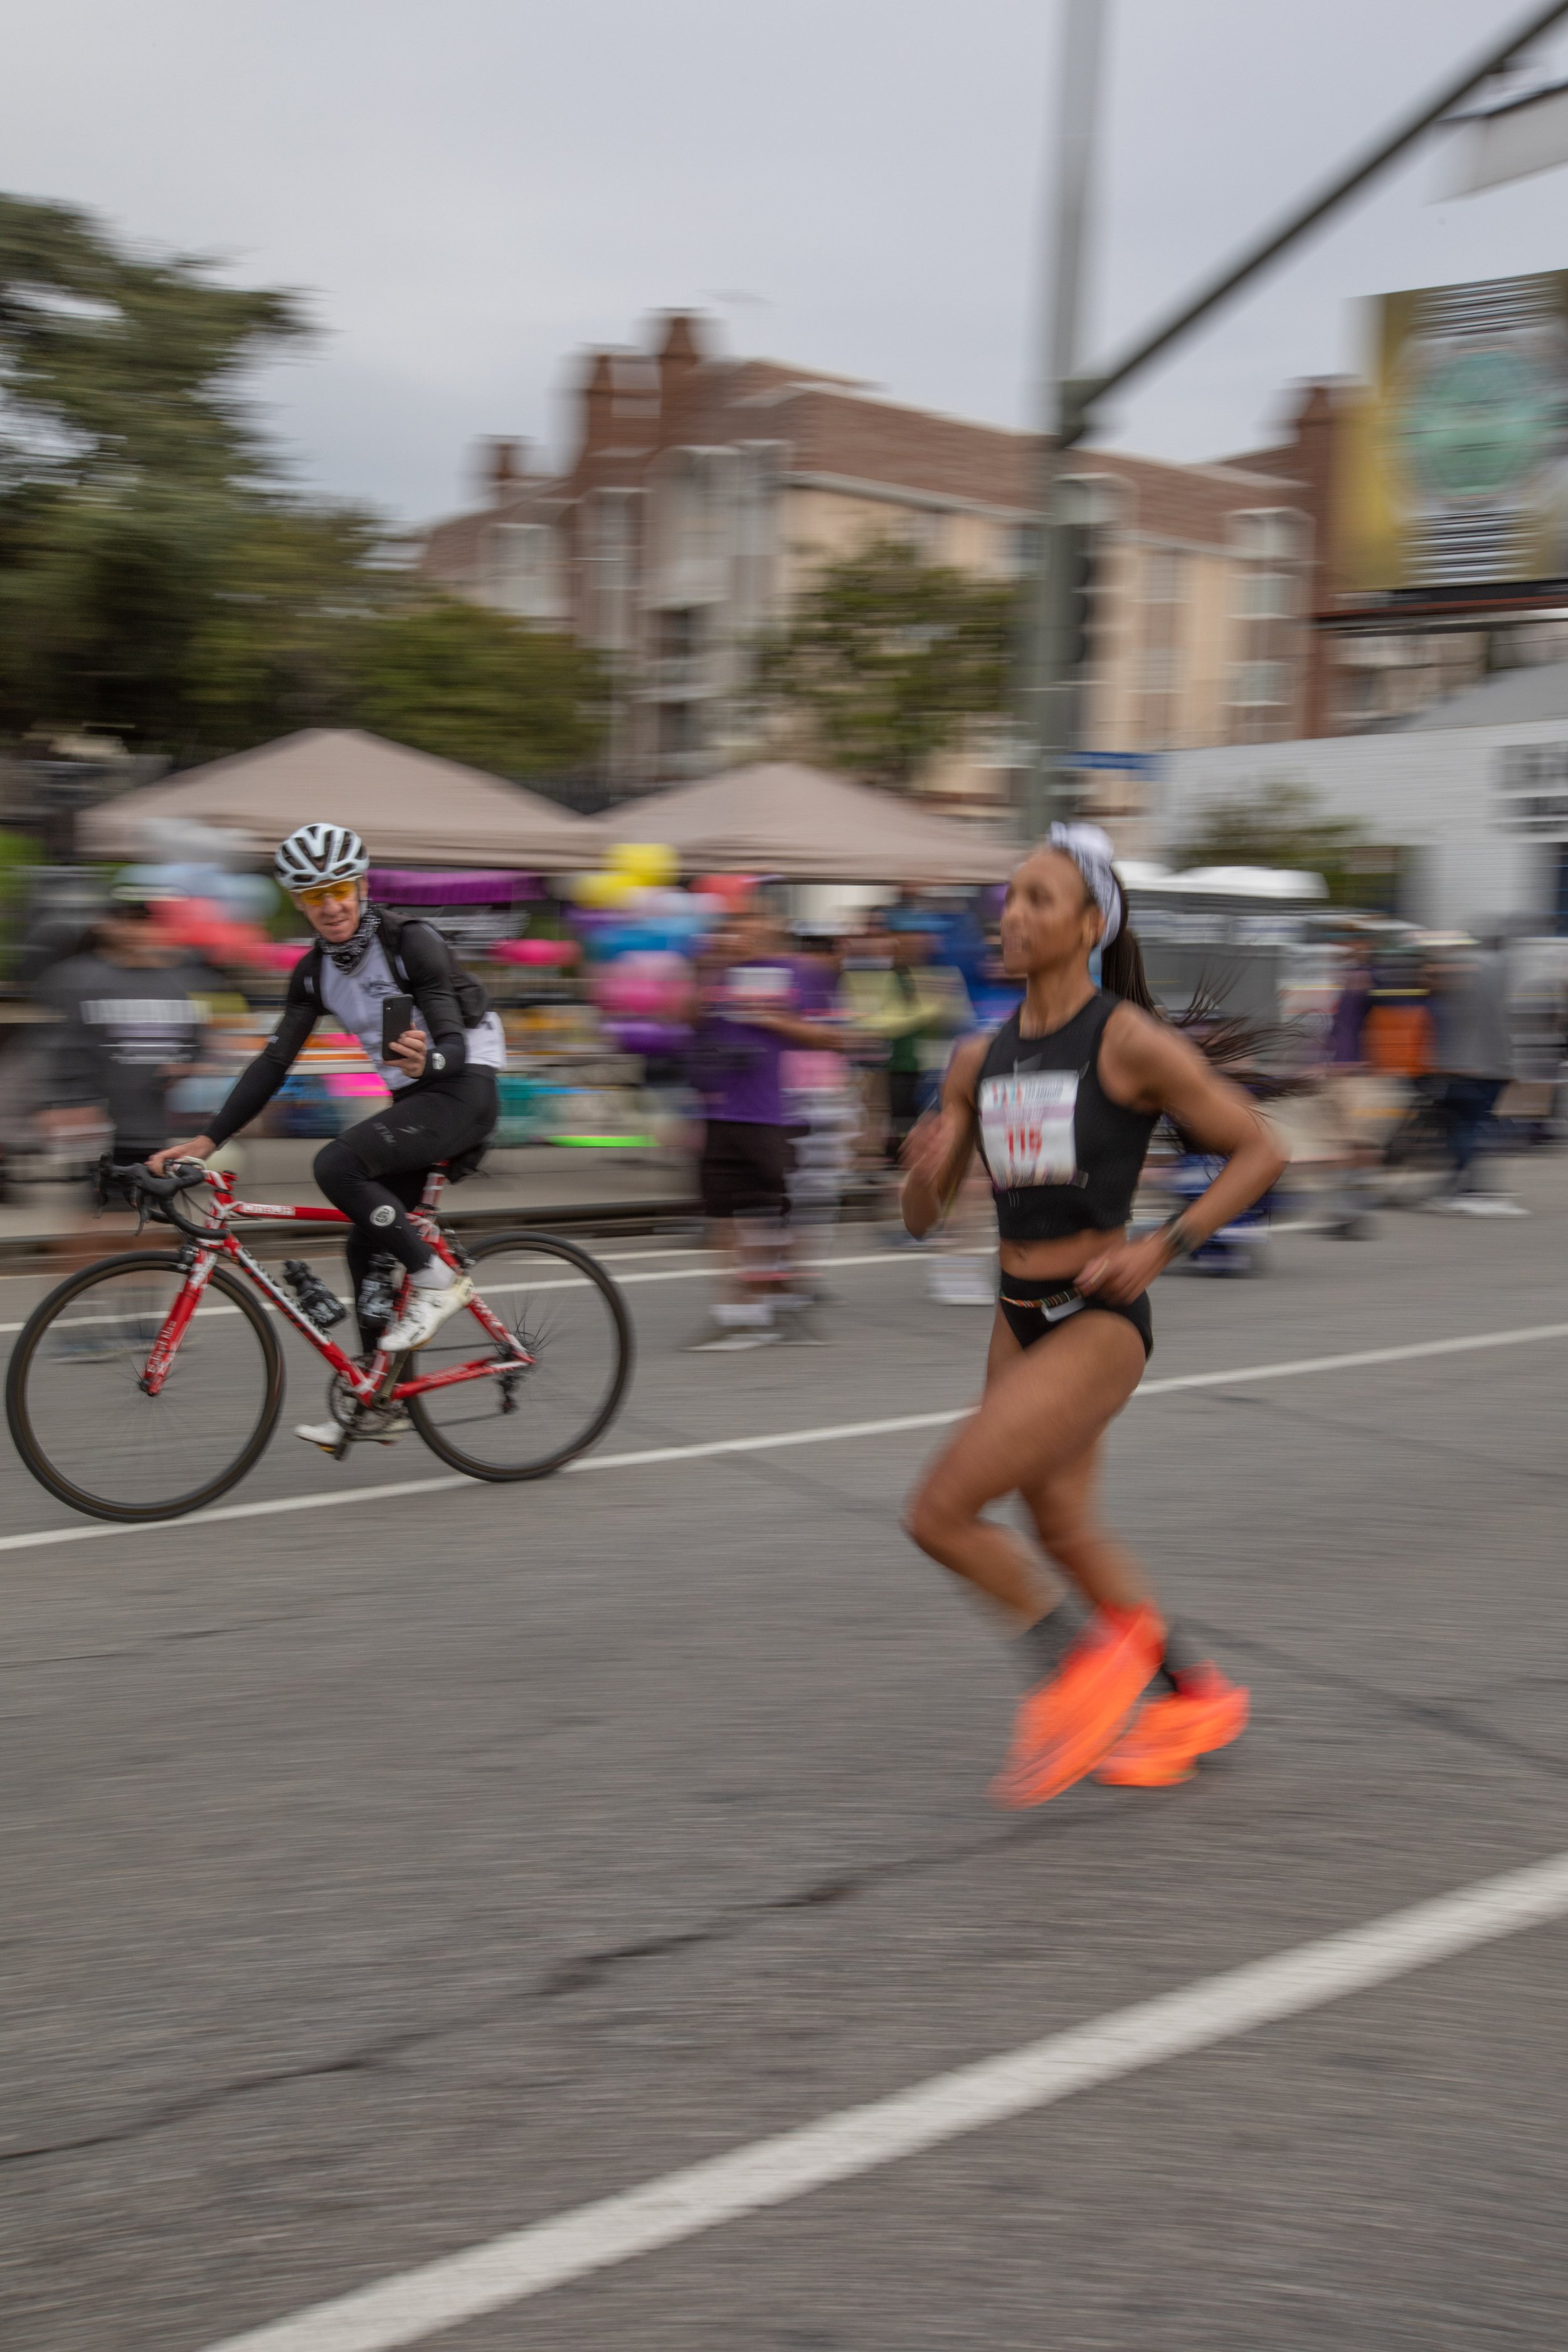  American Sharada Maddox from Los Angeles running on Santa Monica Blvd. being recorded by a cyclist admirer heading West just passing through cheers on mile 19 during the L.A. Marathon 2023. Maddox placed in seventh position on Sunday, March 19, 2023